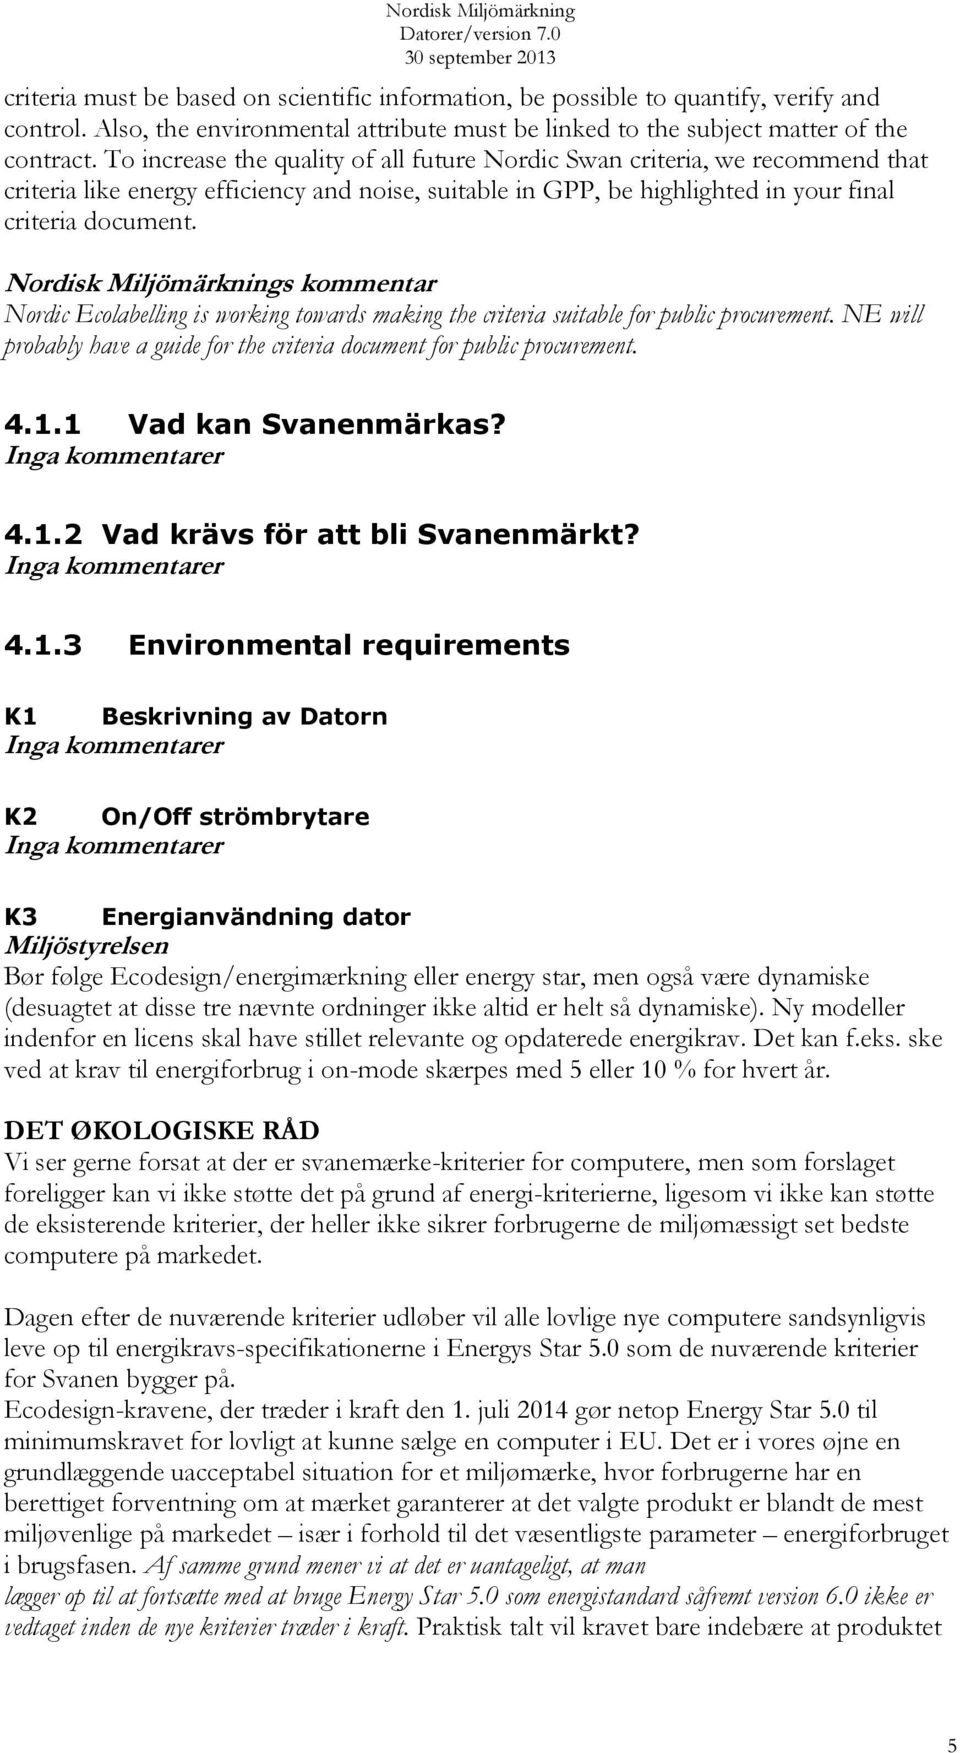 Nordic Ecolabelling is working towards making the criteria suitable for public procurement. NE will probably have a guide for the criteria document for public procurement. 4.1.1 Vad kan Svanenmärkas?